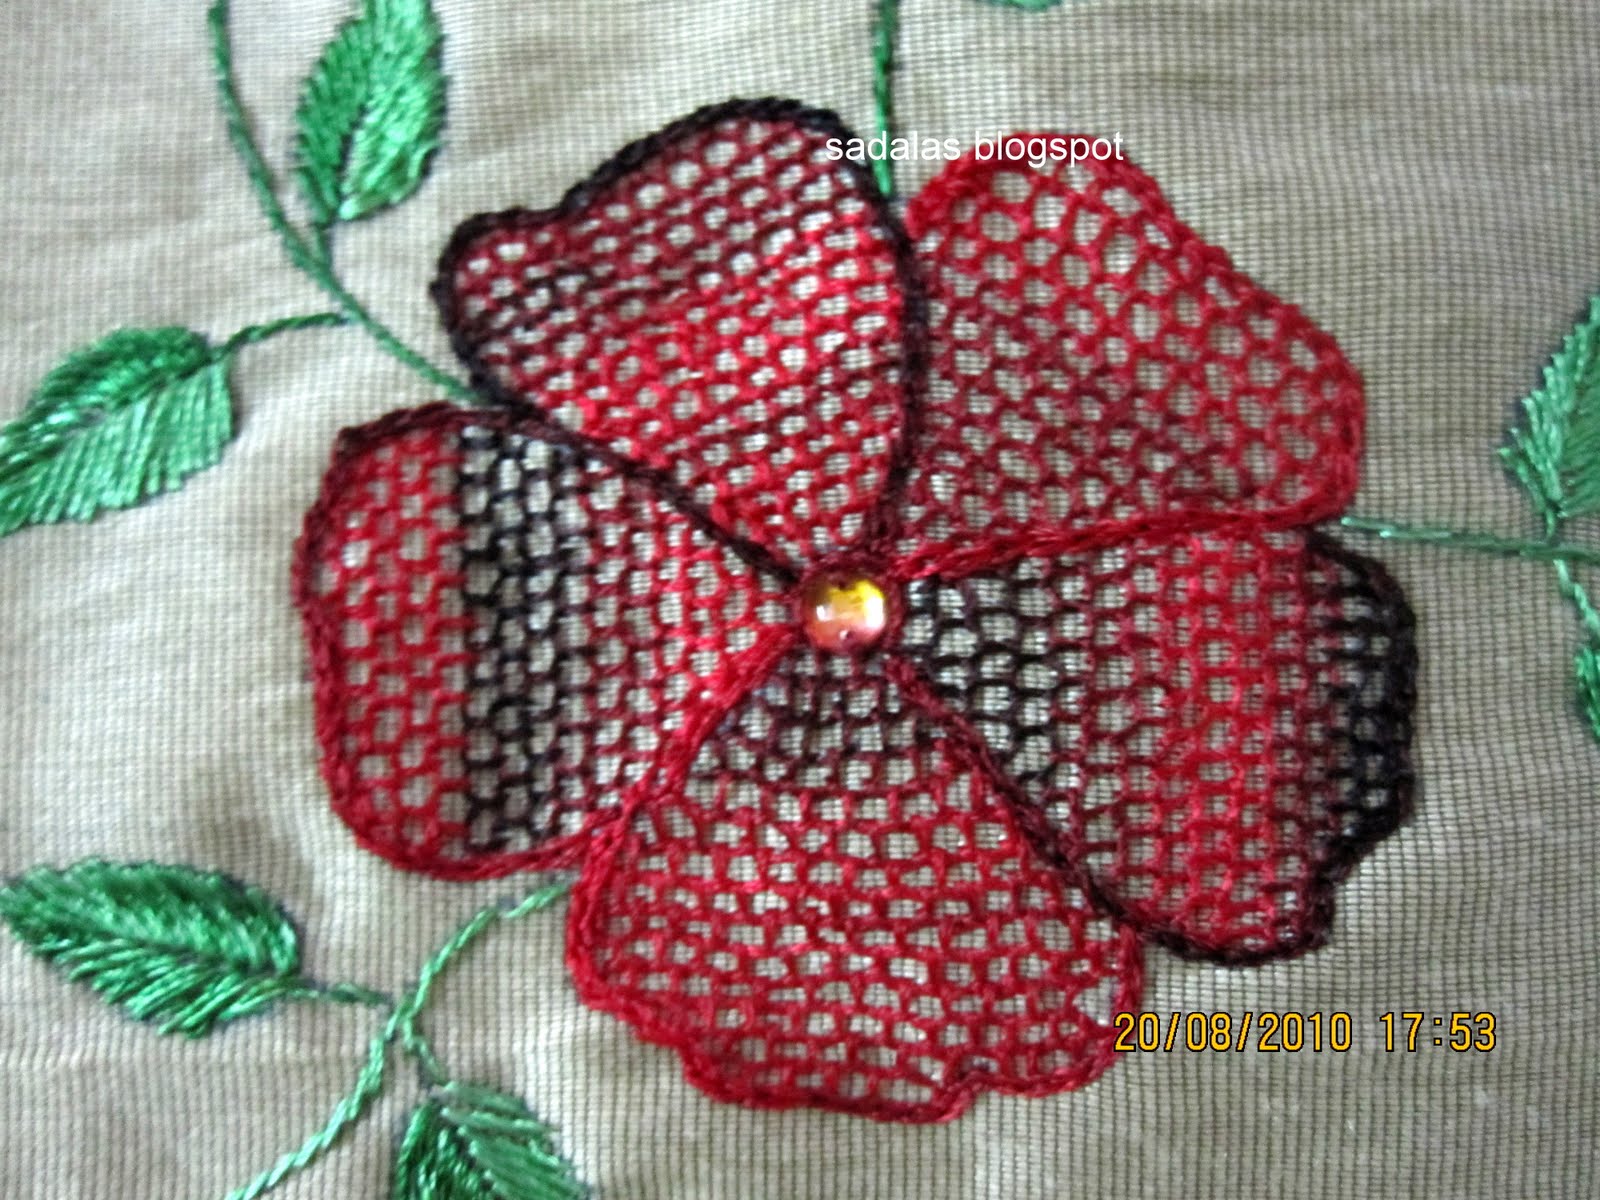 How To Do Redwork Embroidery - Video - Metacafe - Online Video